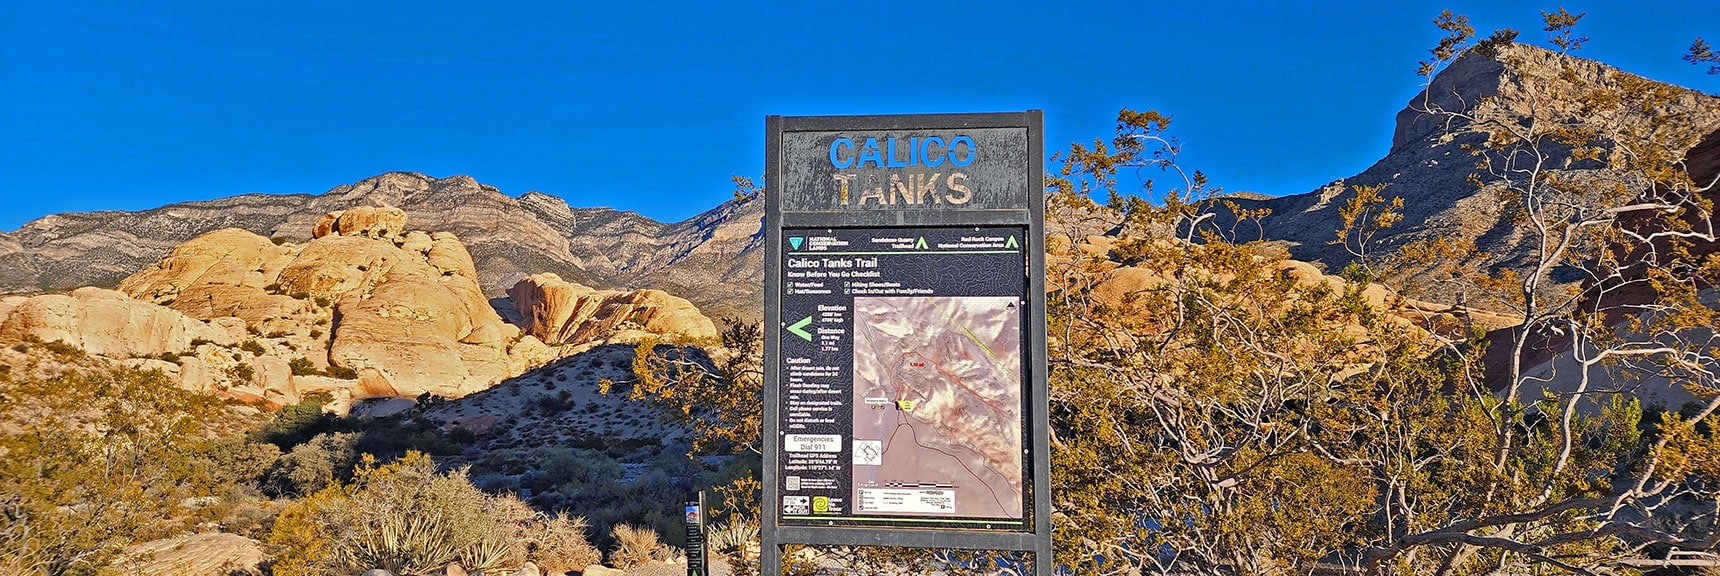 Trailhead Sign for the Calico Tanks Trail | Calico Tanks | Red Rock Canyon National Conservation Area, Nevada